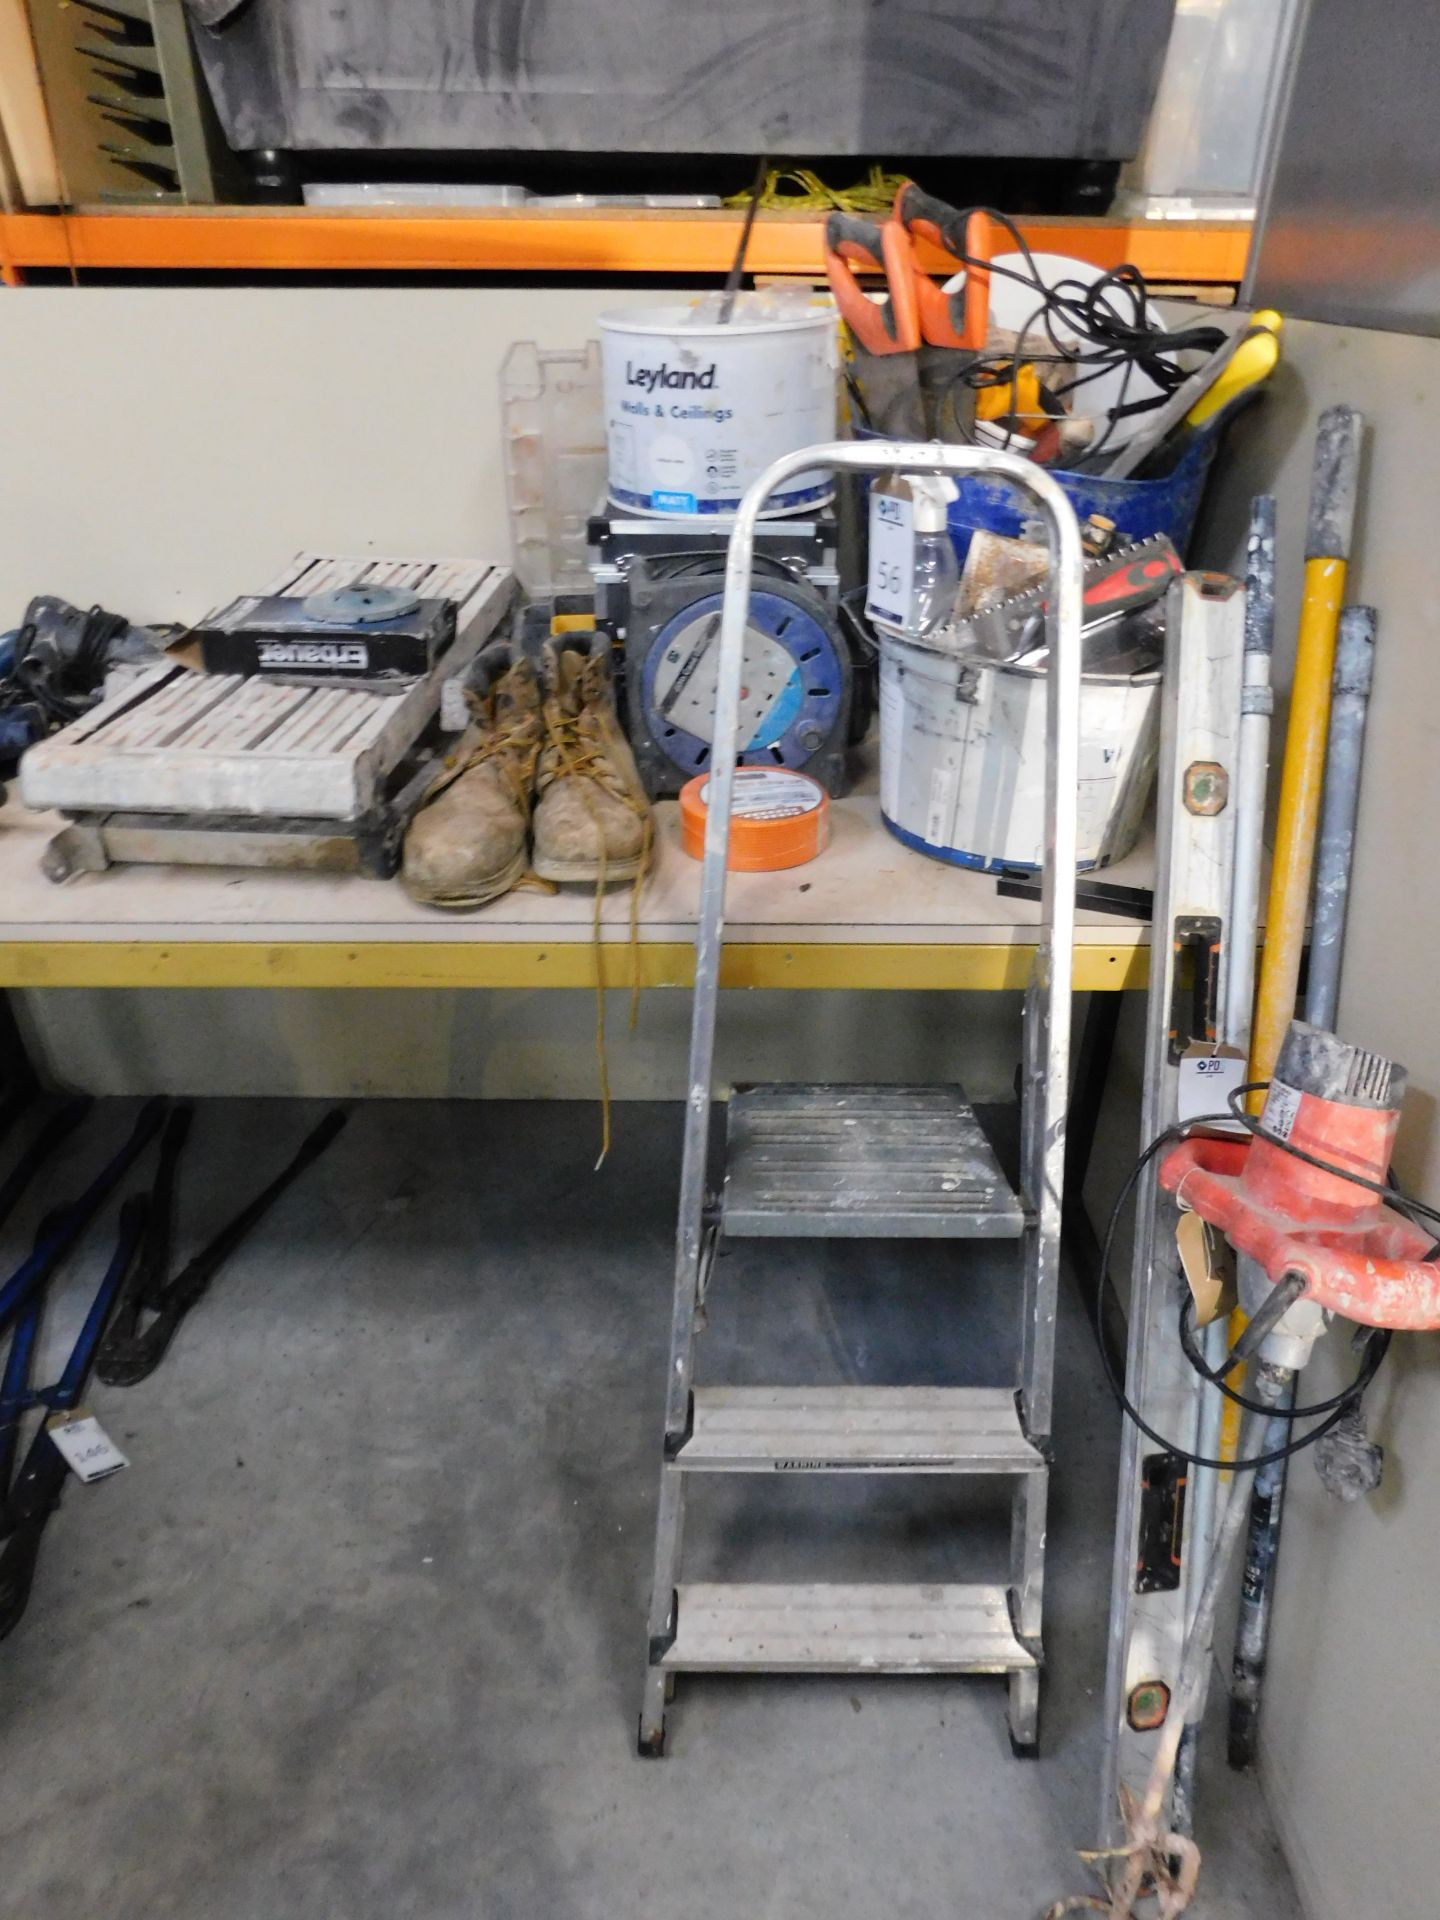 Quantity of Plastering Tools, Saws, Pair of Safety Boots, Aluminium Steps & Other Miscellaneous